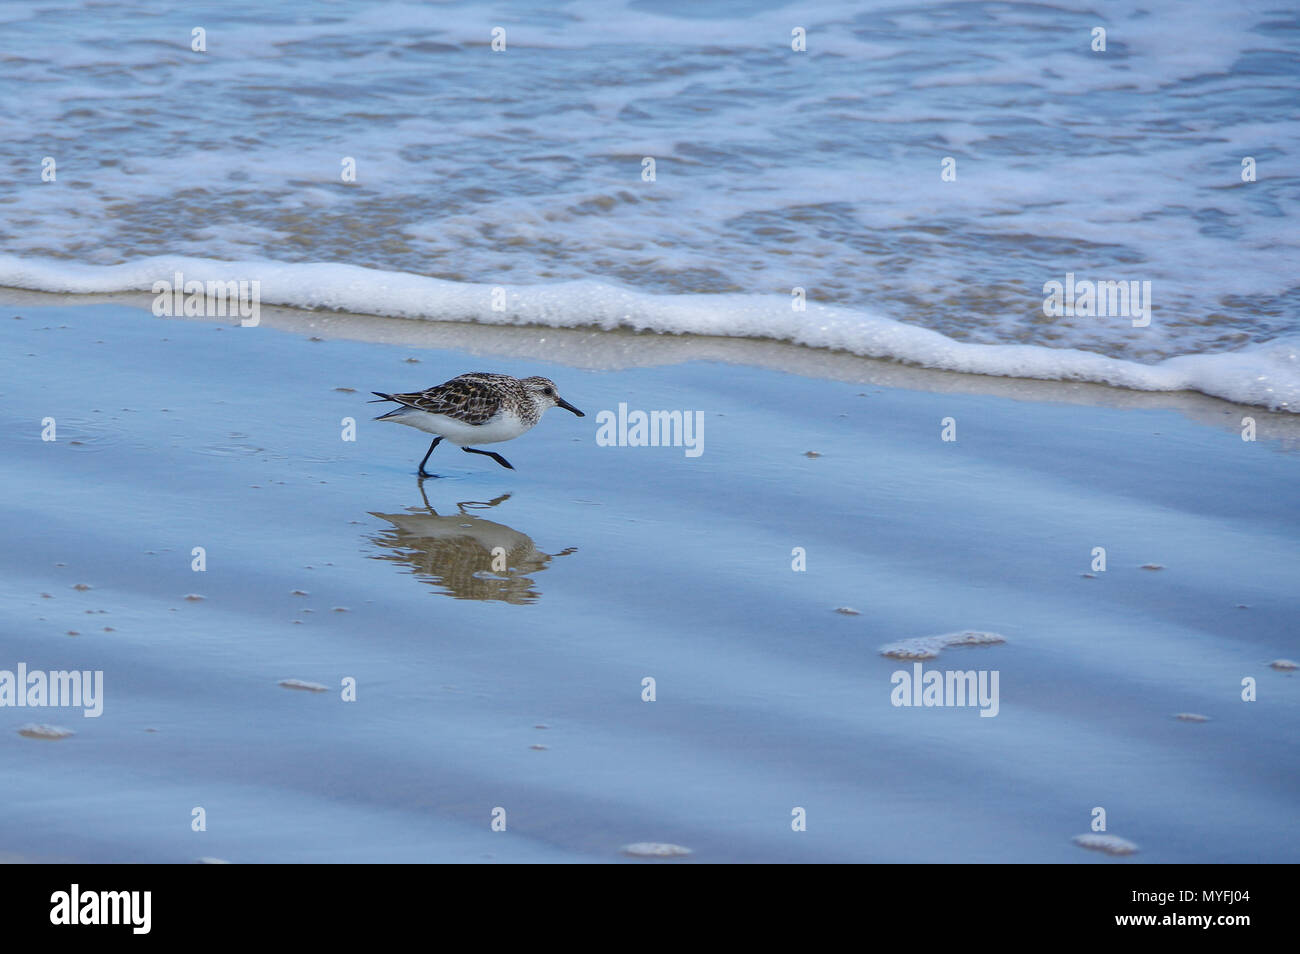 Galveston, texas, the strand hi-res stock photography and images - Alamy